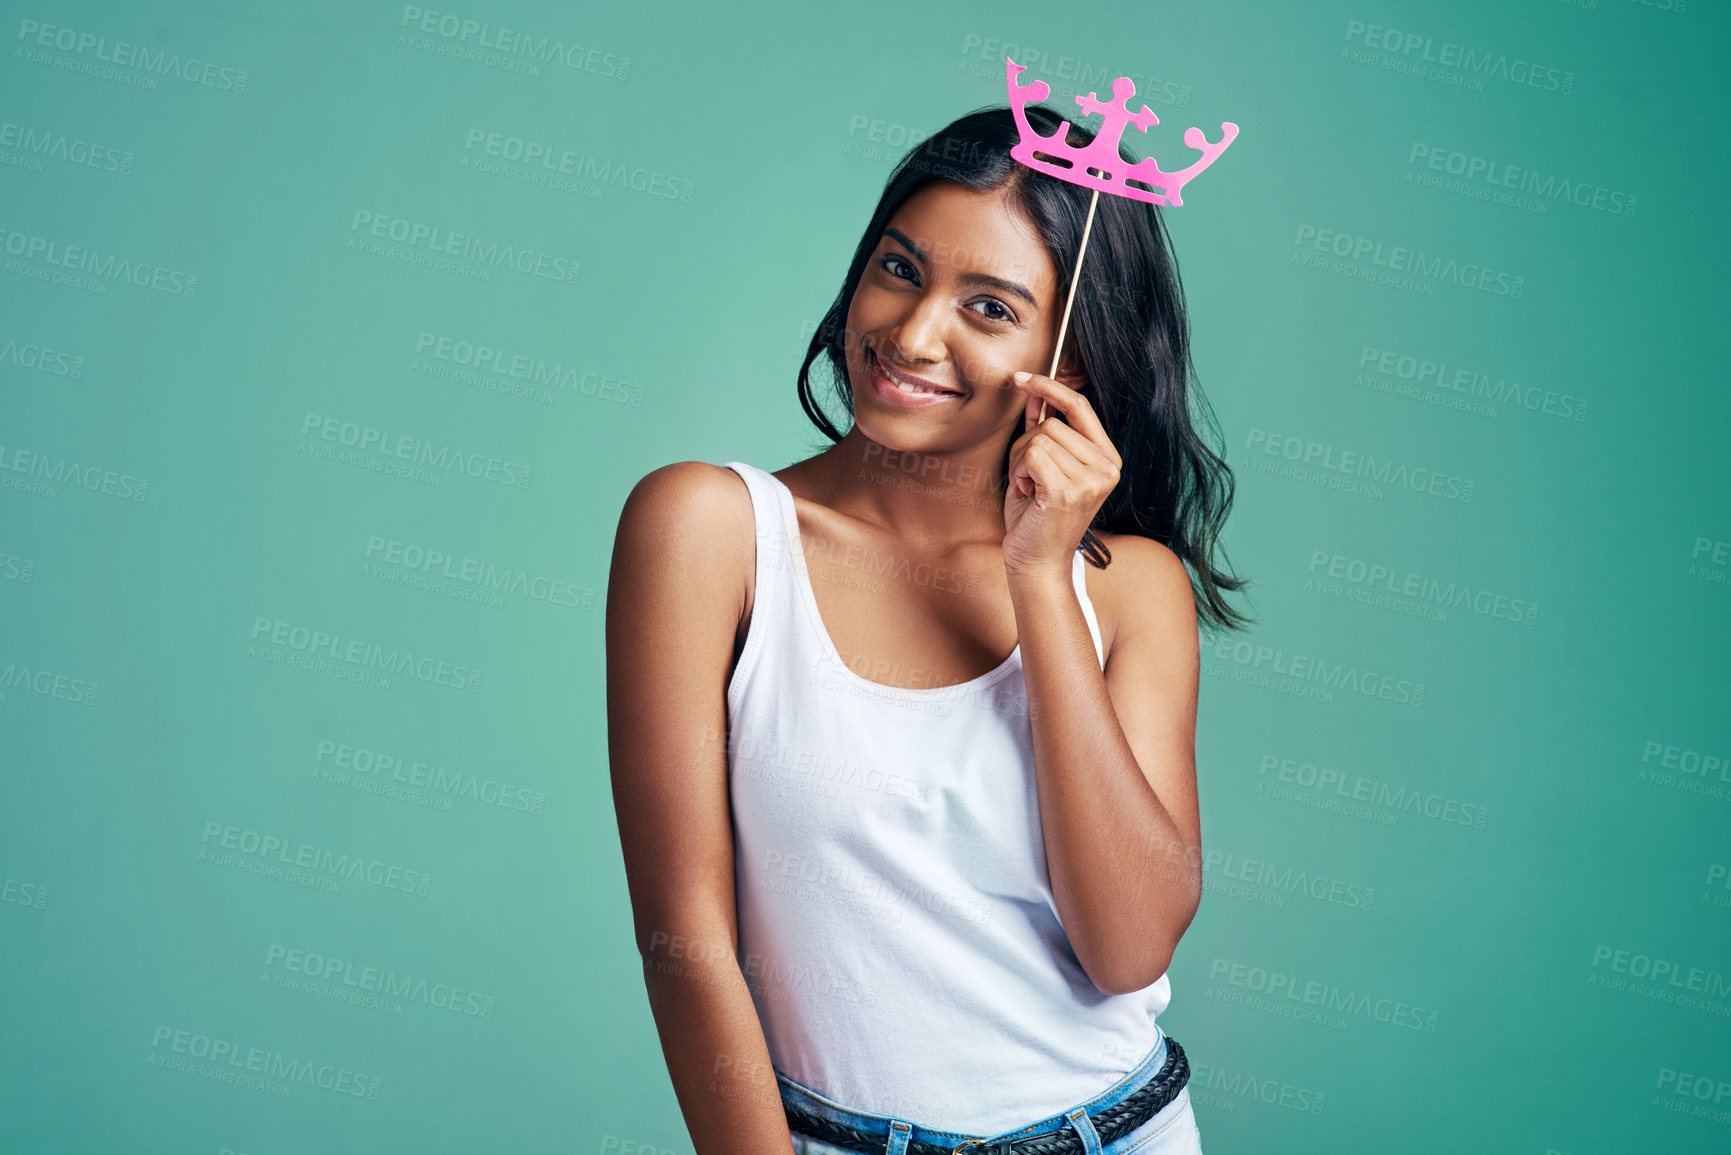 Buy stock photo Studio portrait of a beautiful young woman posing with a prop crown against a green background